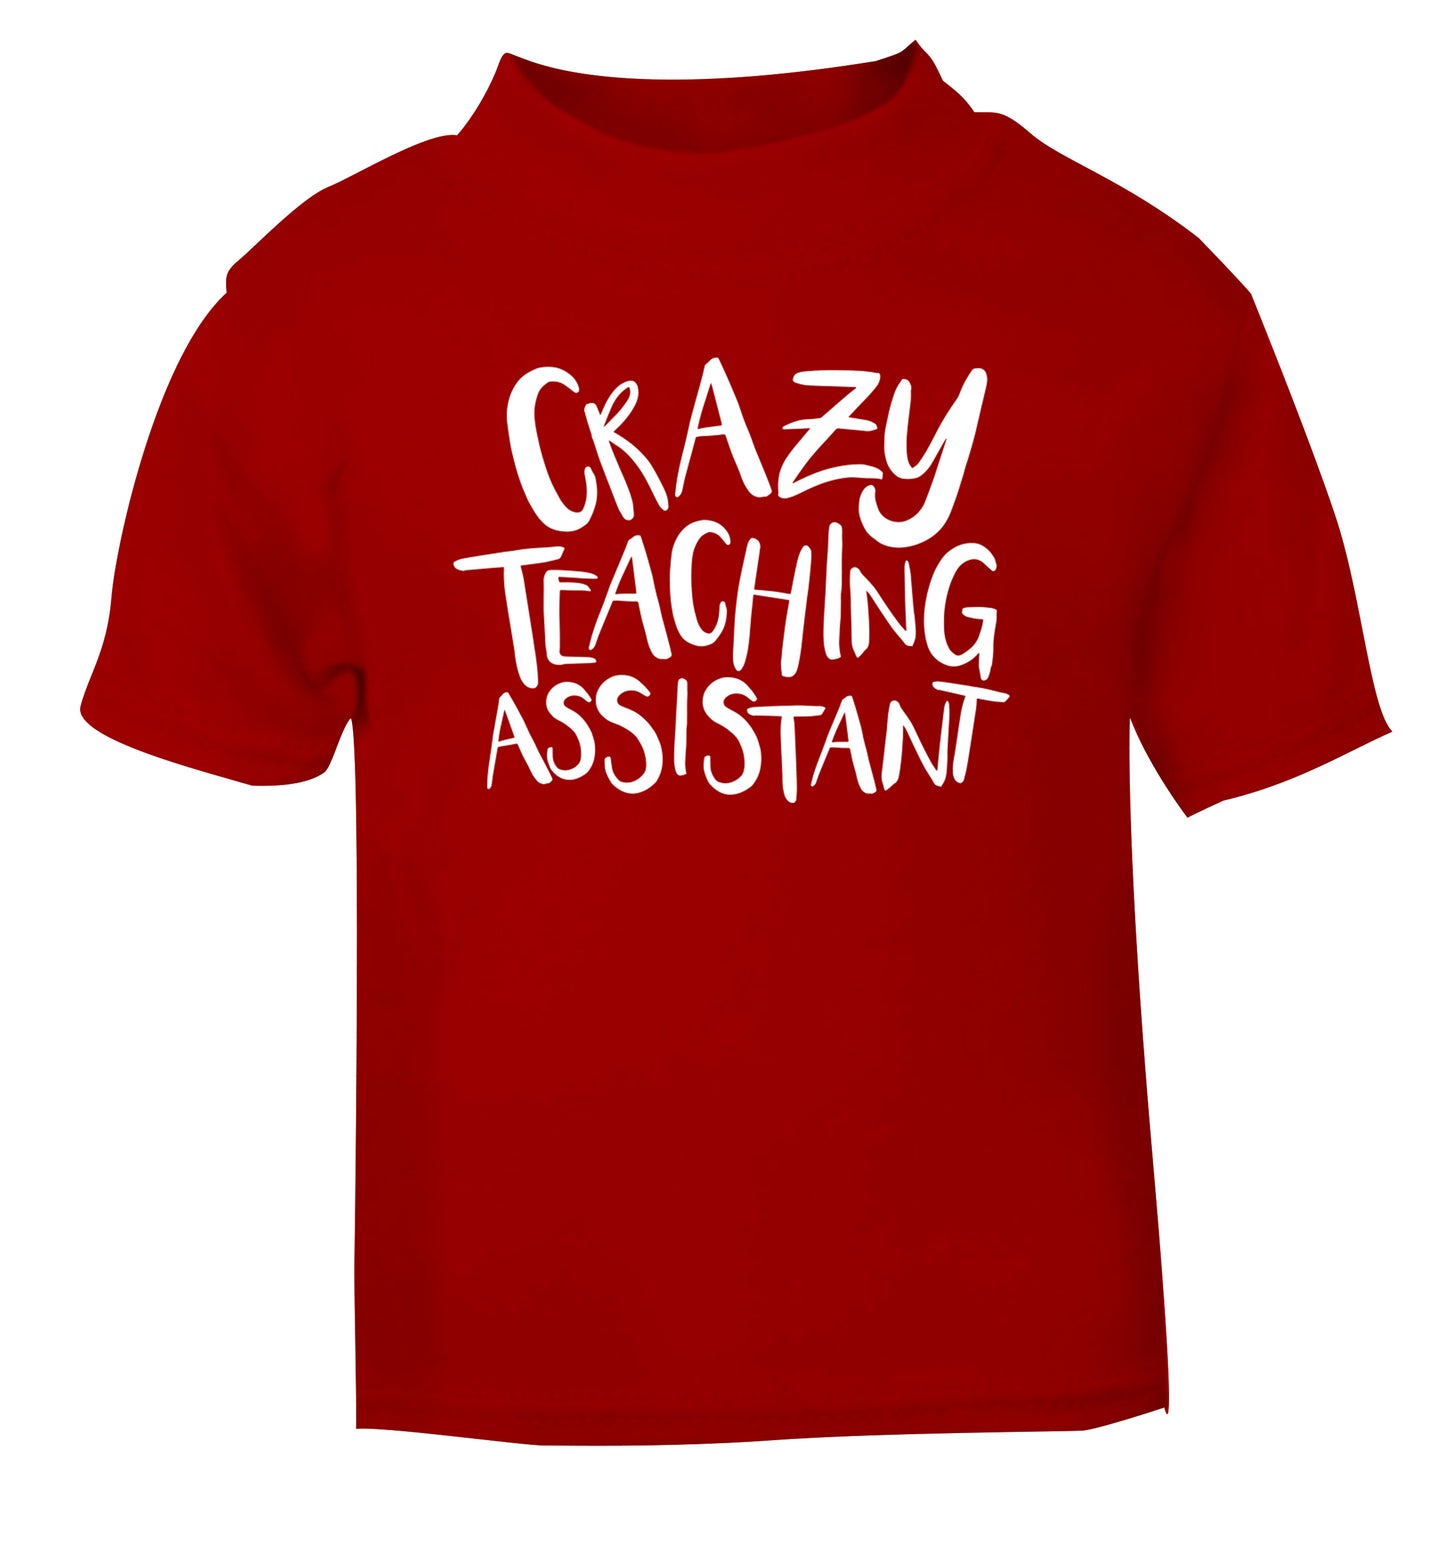 Crazy Teaching Assistant red Baby Toddler Tshirt 2 Years